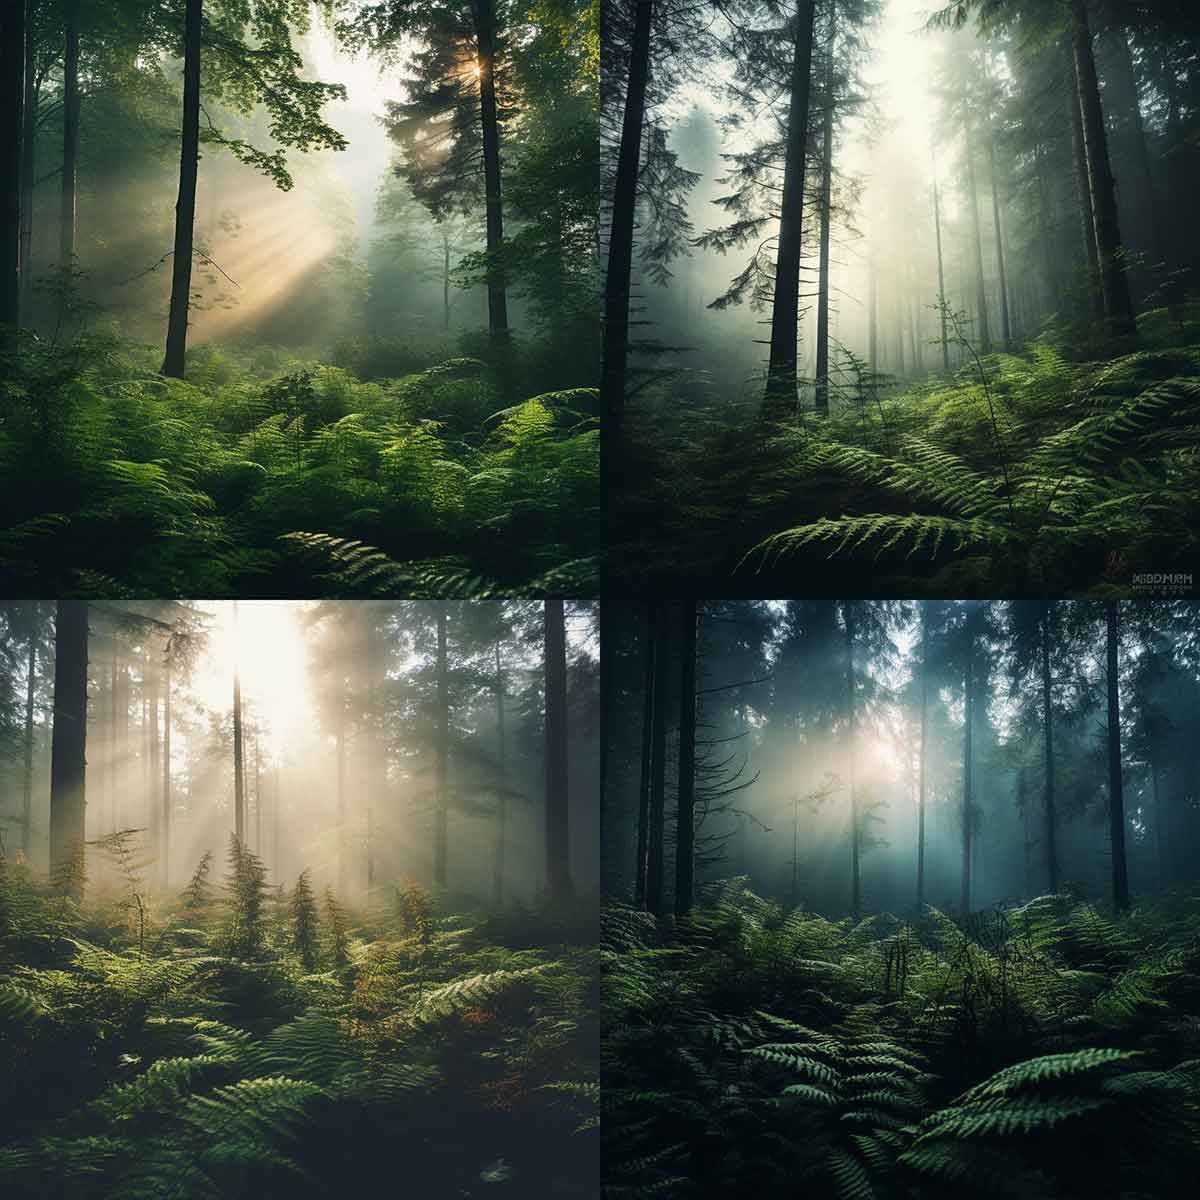 AI generated image(s) of a forest landscape featuring cinematic directional lighting.